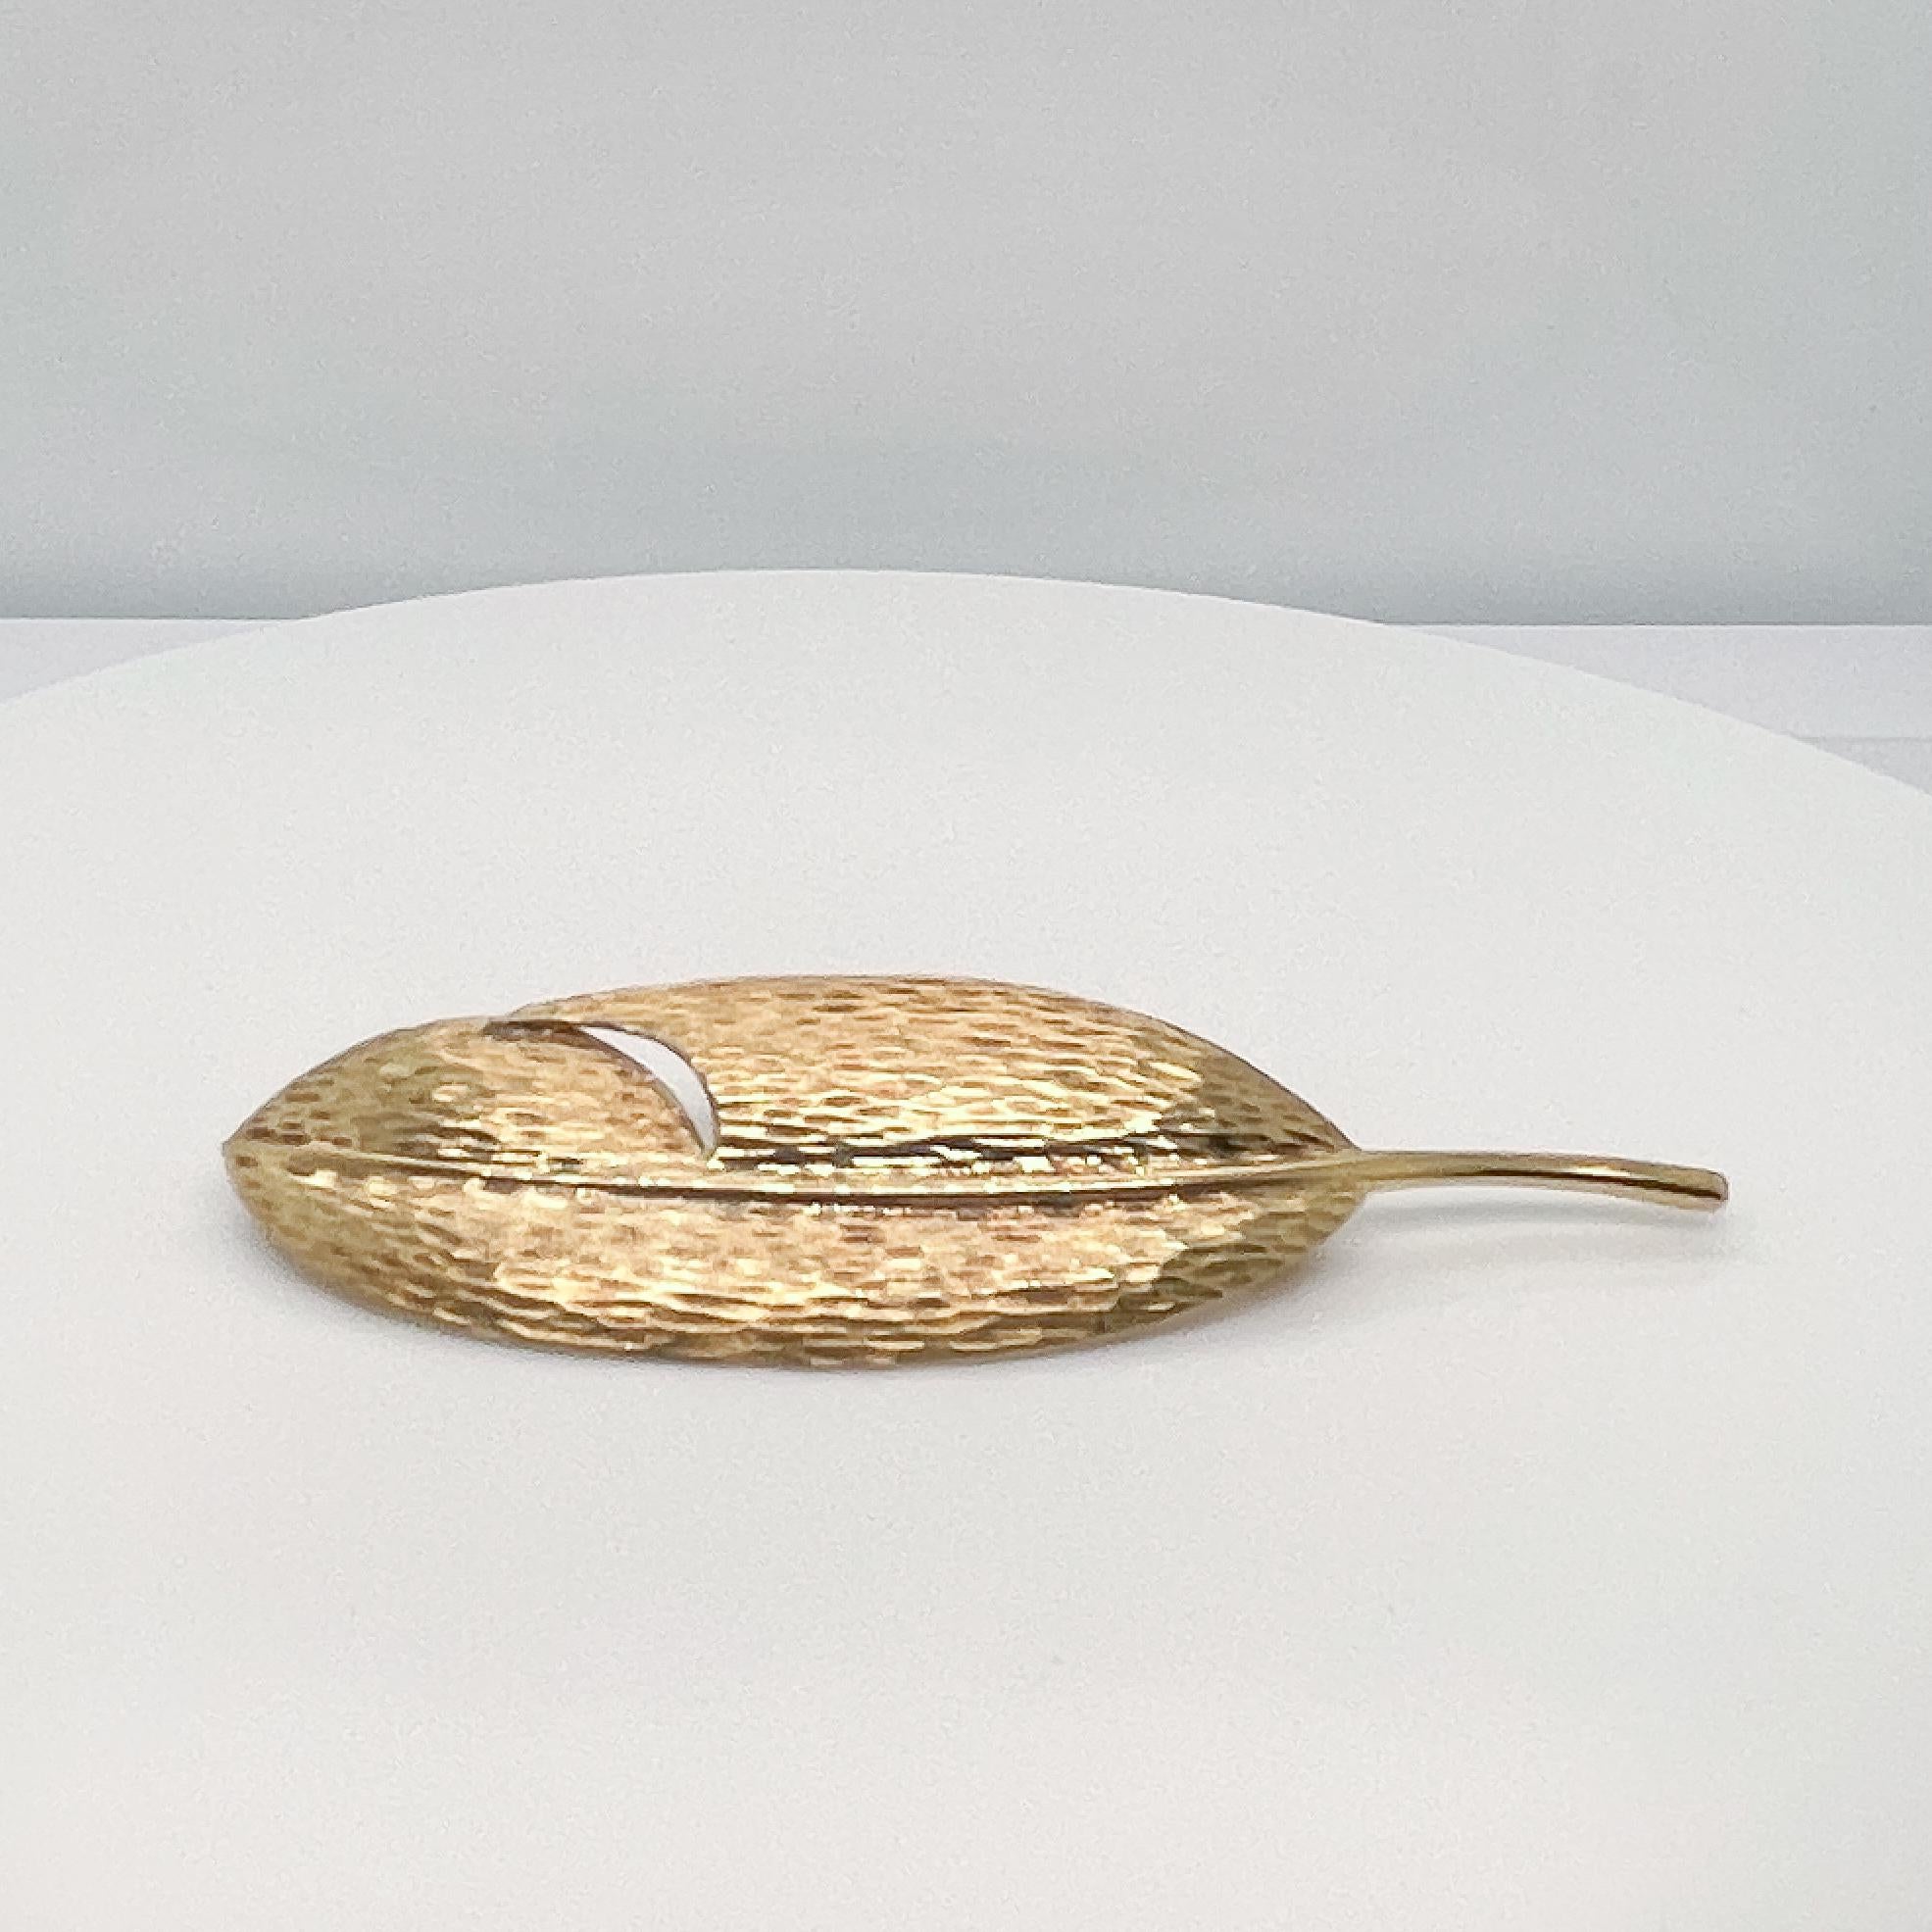 Modern 18 Karat Yellow Gold Leaf or Feather Brooch by Angela Cummings for Tiffany & Co. For Sale